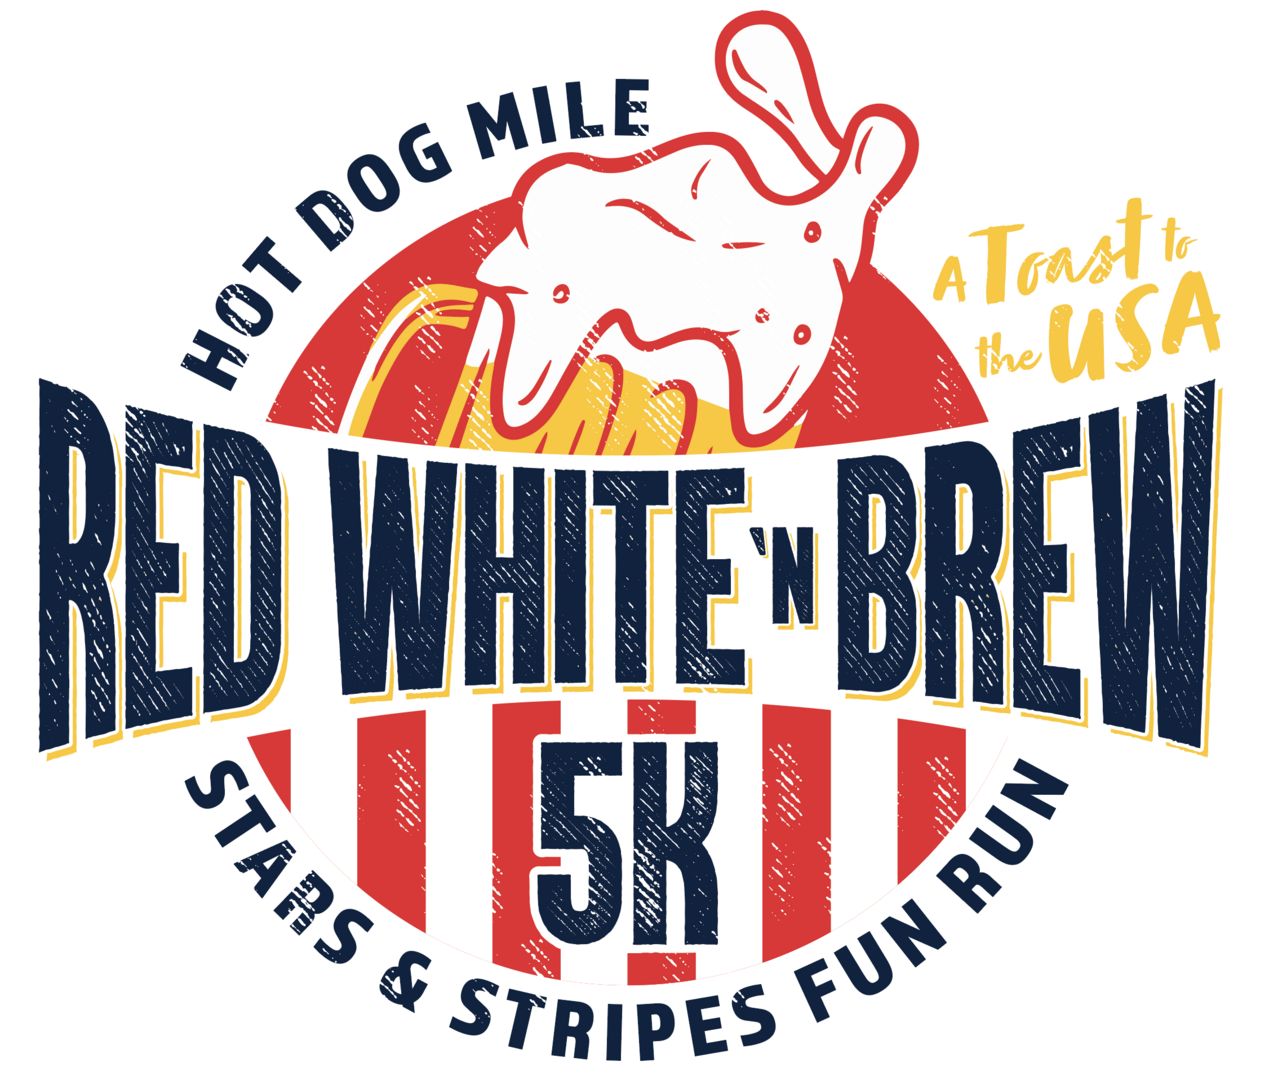 5K Race Red White 'n Brew 5k House 6 Brewing Co., 44427 Atwater Drive